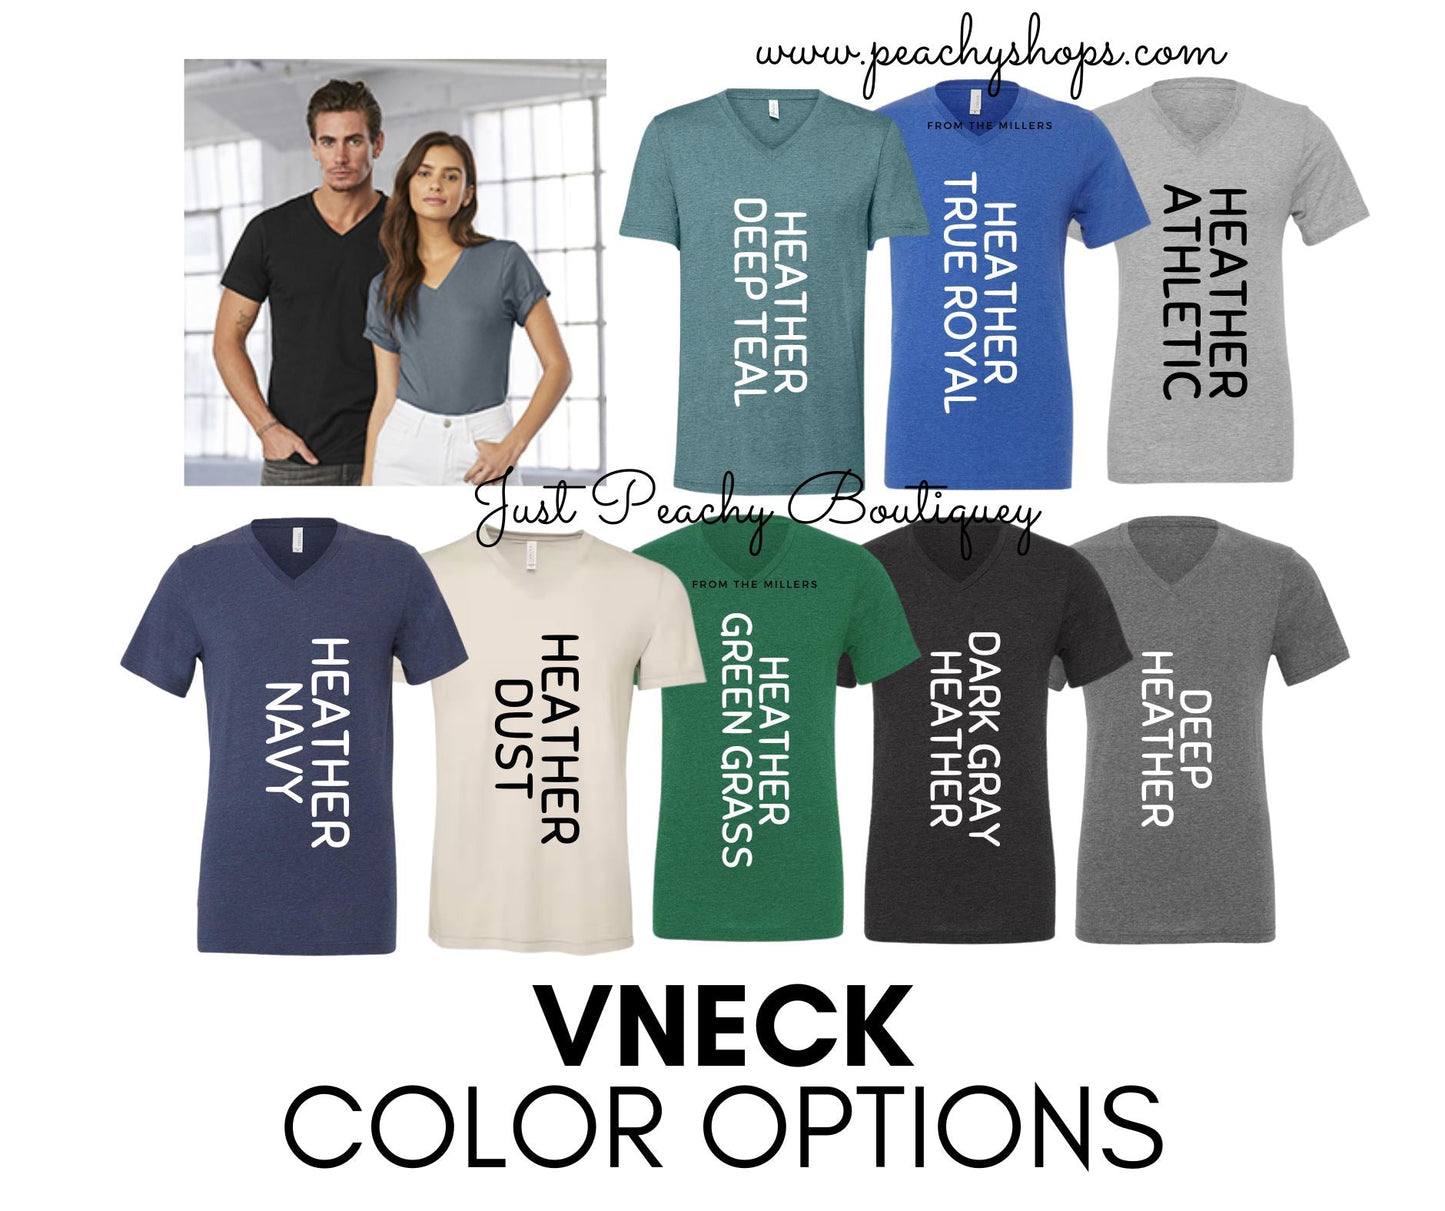 LOVER CHECKERED VALENTINE'S T-SHIRT OR PICK FROM 200 COLOR & STYLE OPTIONS! - TAT 4-7 DAYS